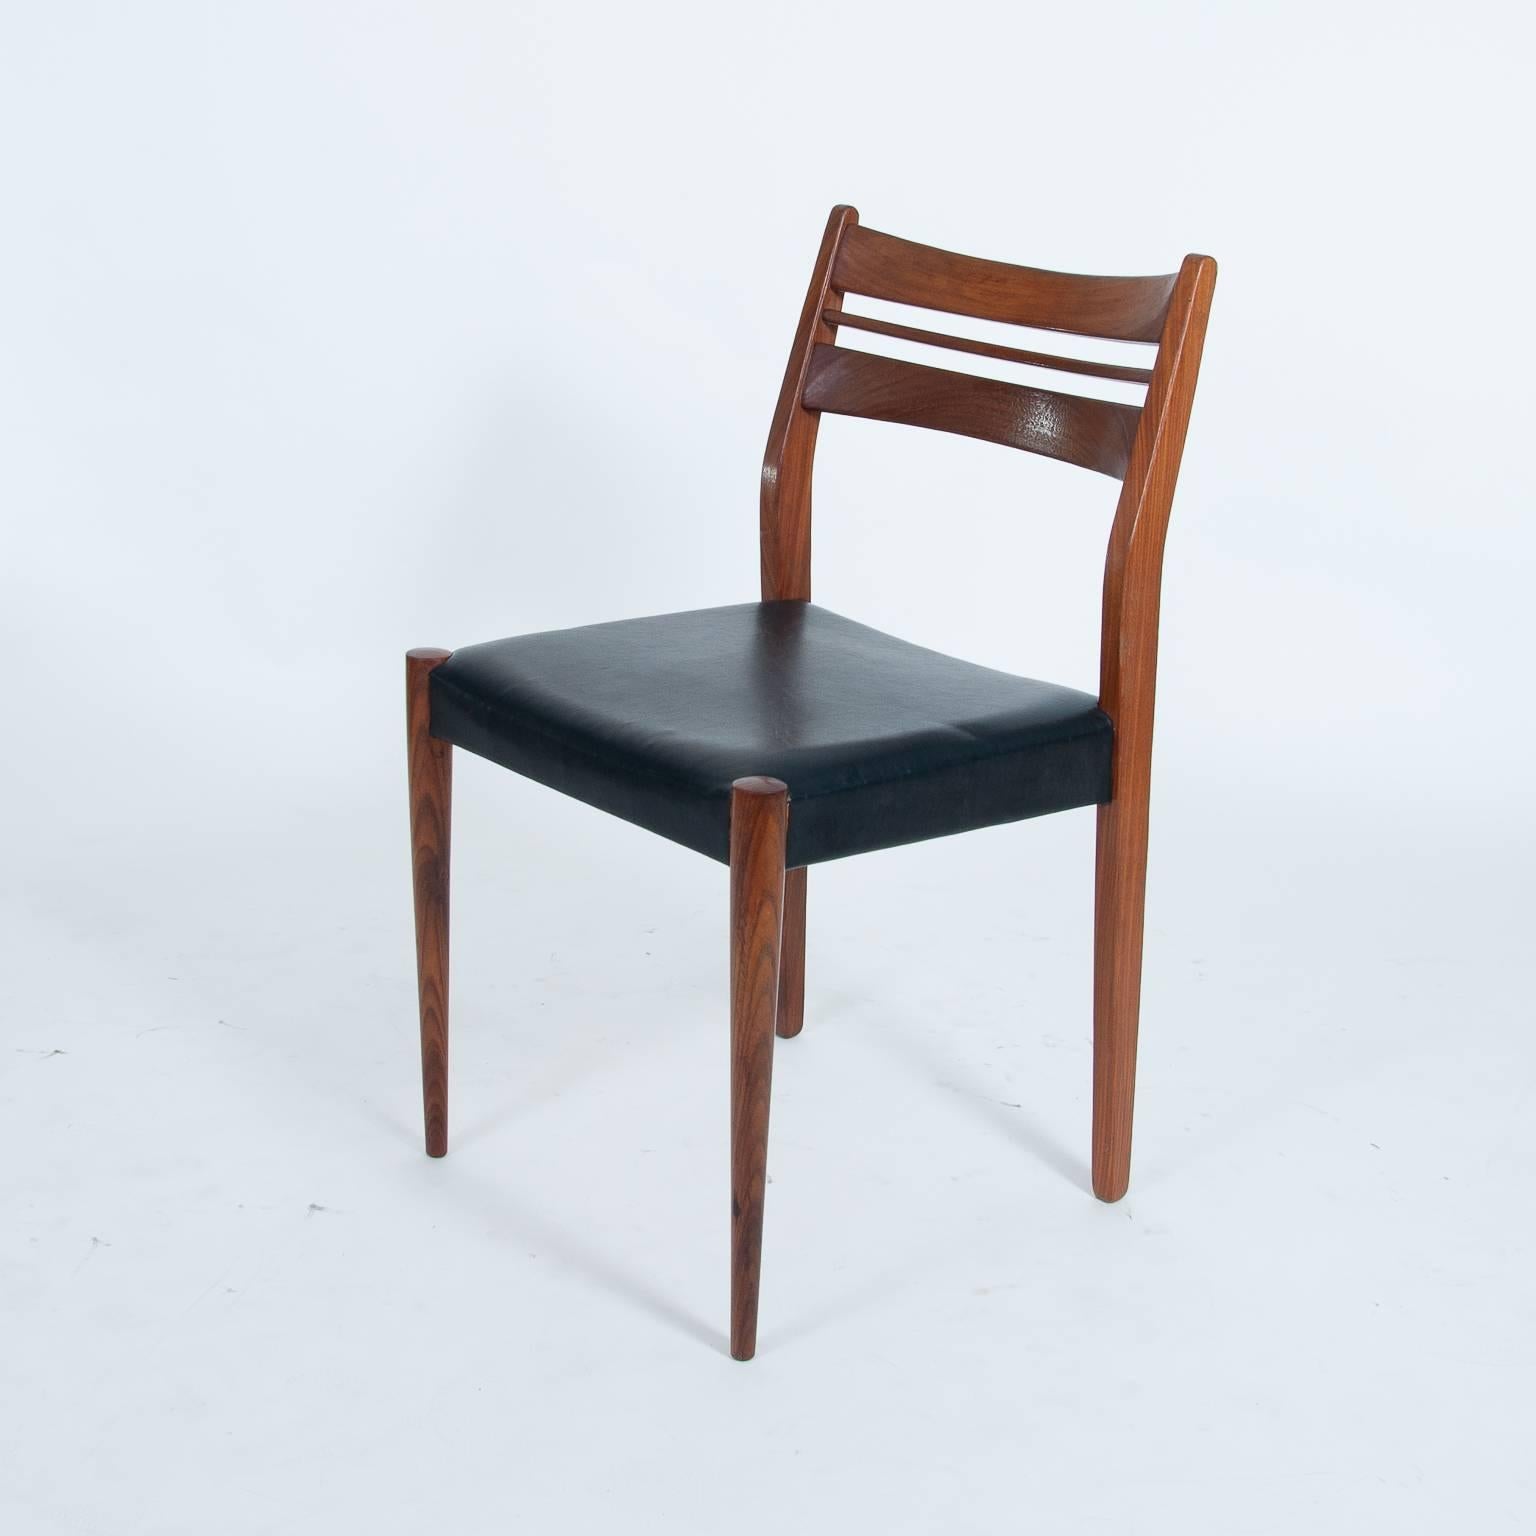 A set of four dining chairs by Arne Vodder, Denmark, 1960s
The originally wood plate of the chairs was changed.